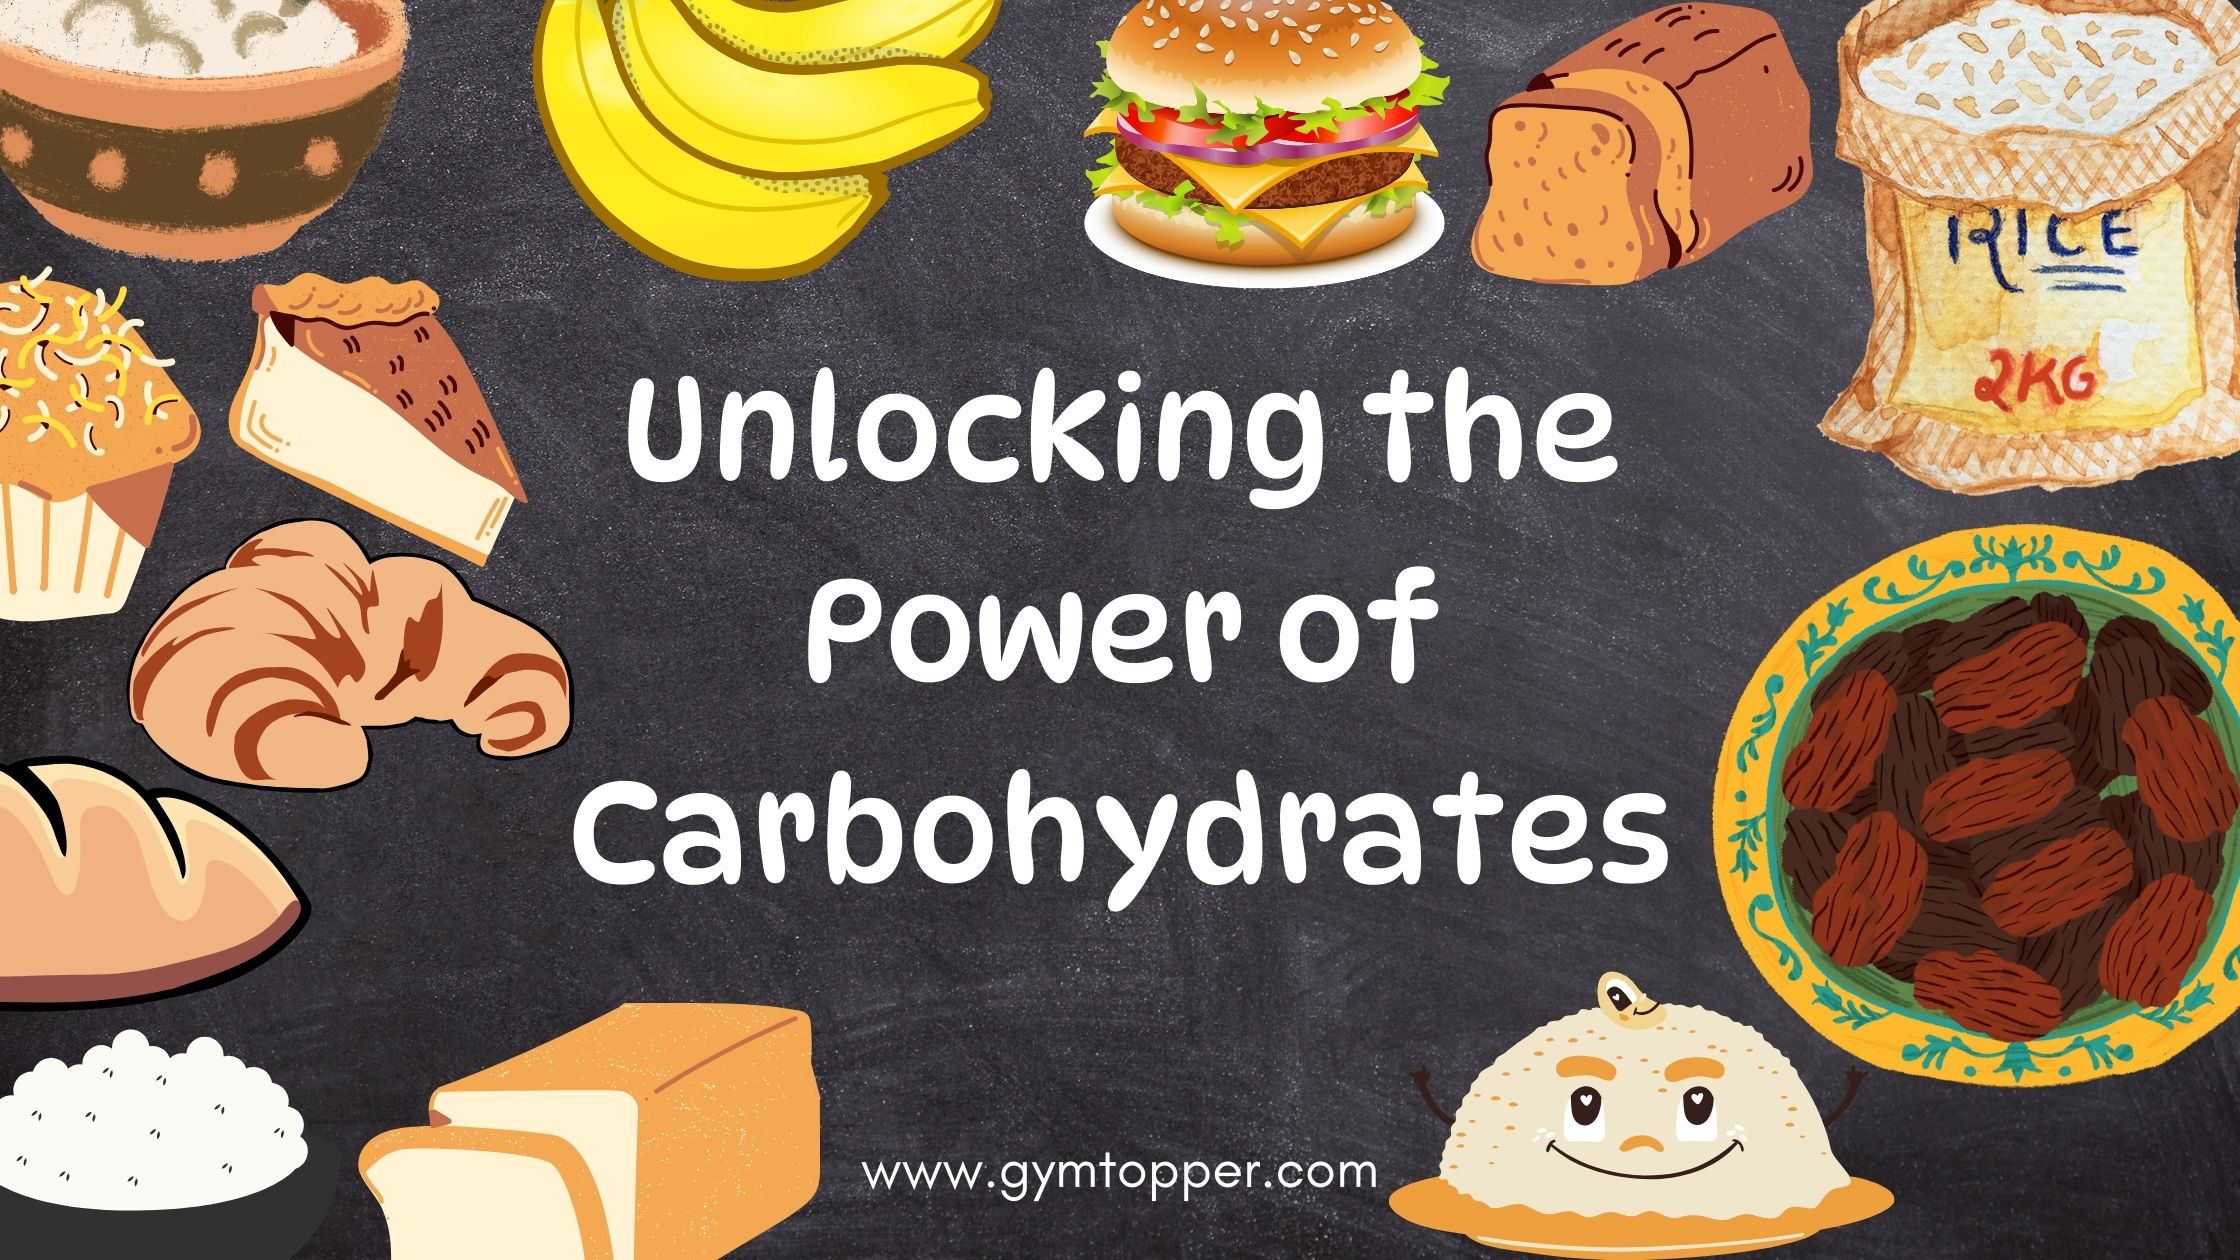 Unlocking the Power of Carbohydrates